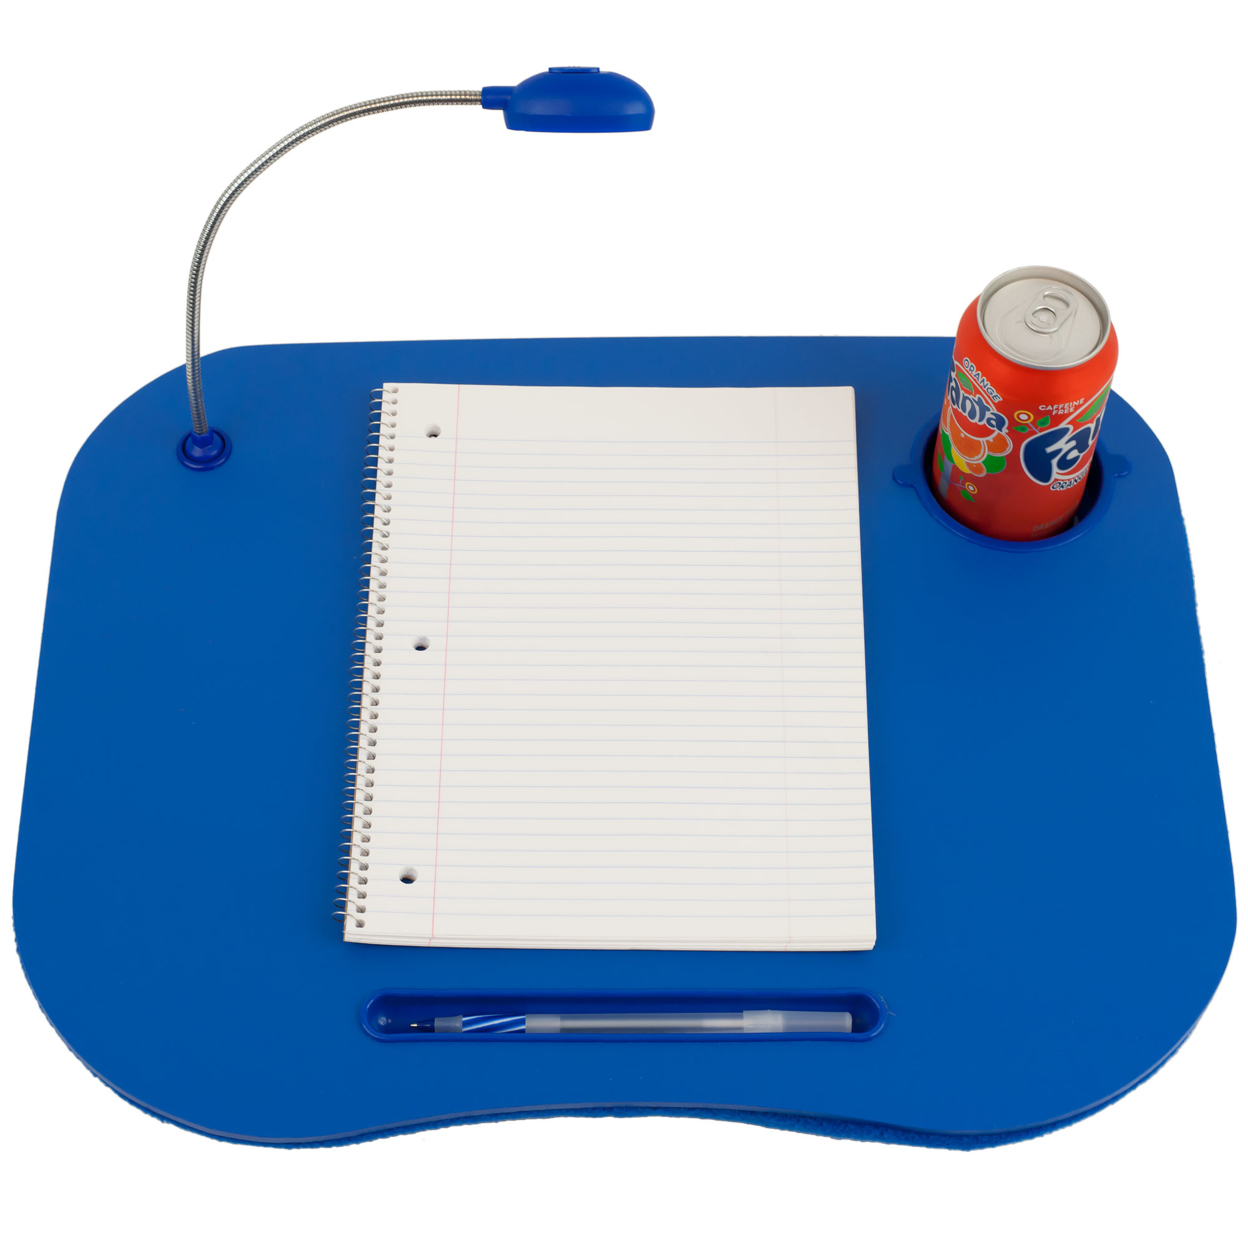 Portable LapTop Desk With Handle And LED Light - Squishy Bottom 19 X 15